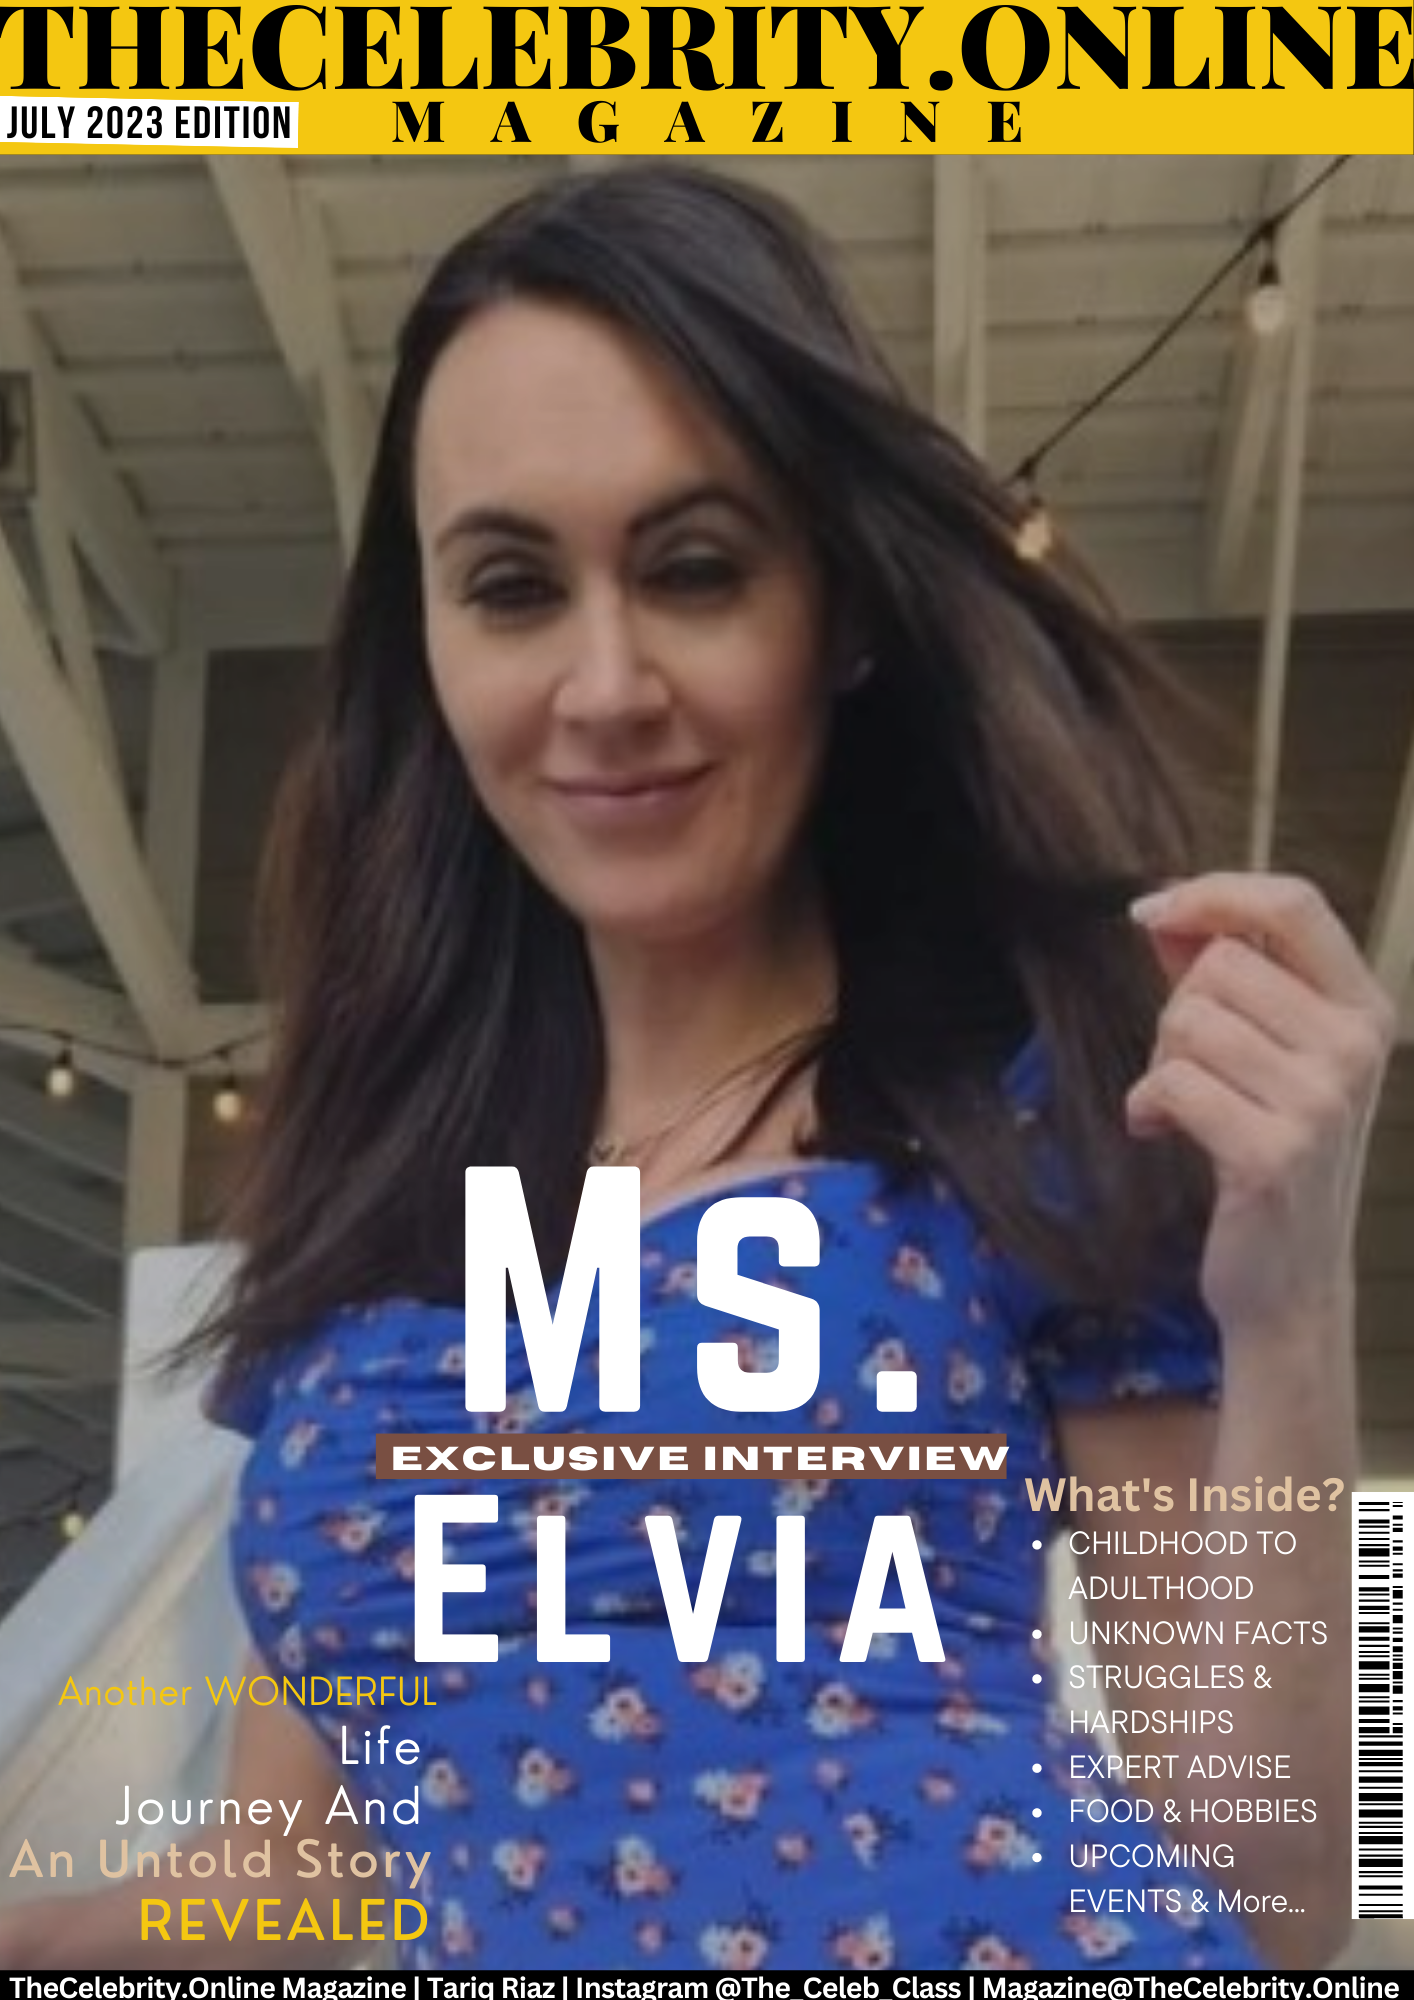 Ms. Elvia Exclusive Interview – ‘Never Give Up On Your Dreams’